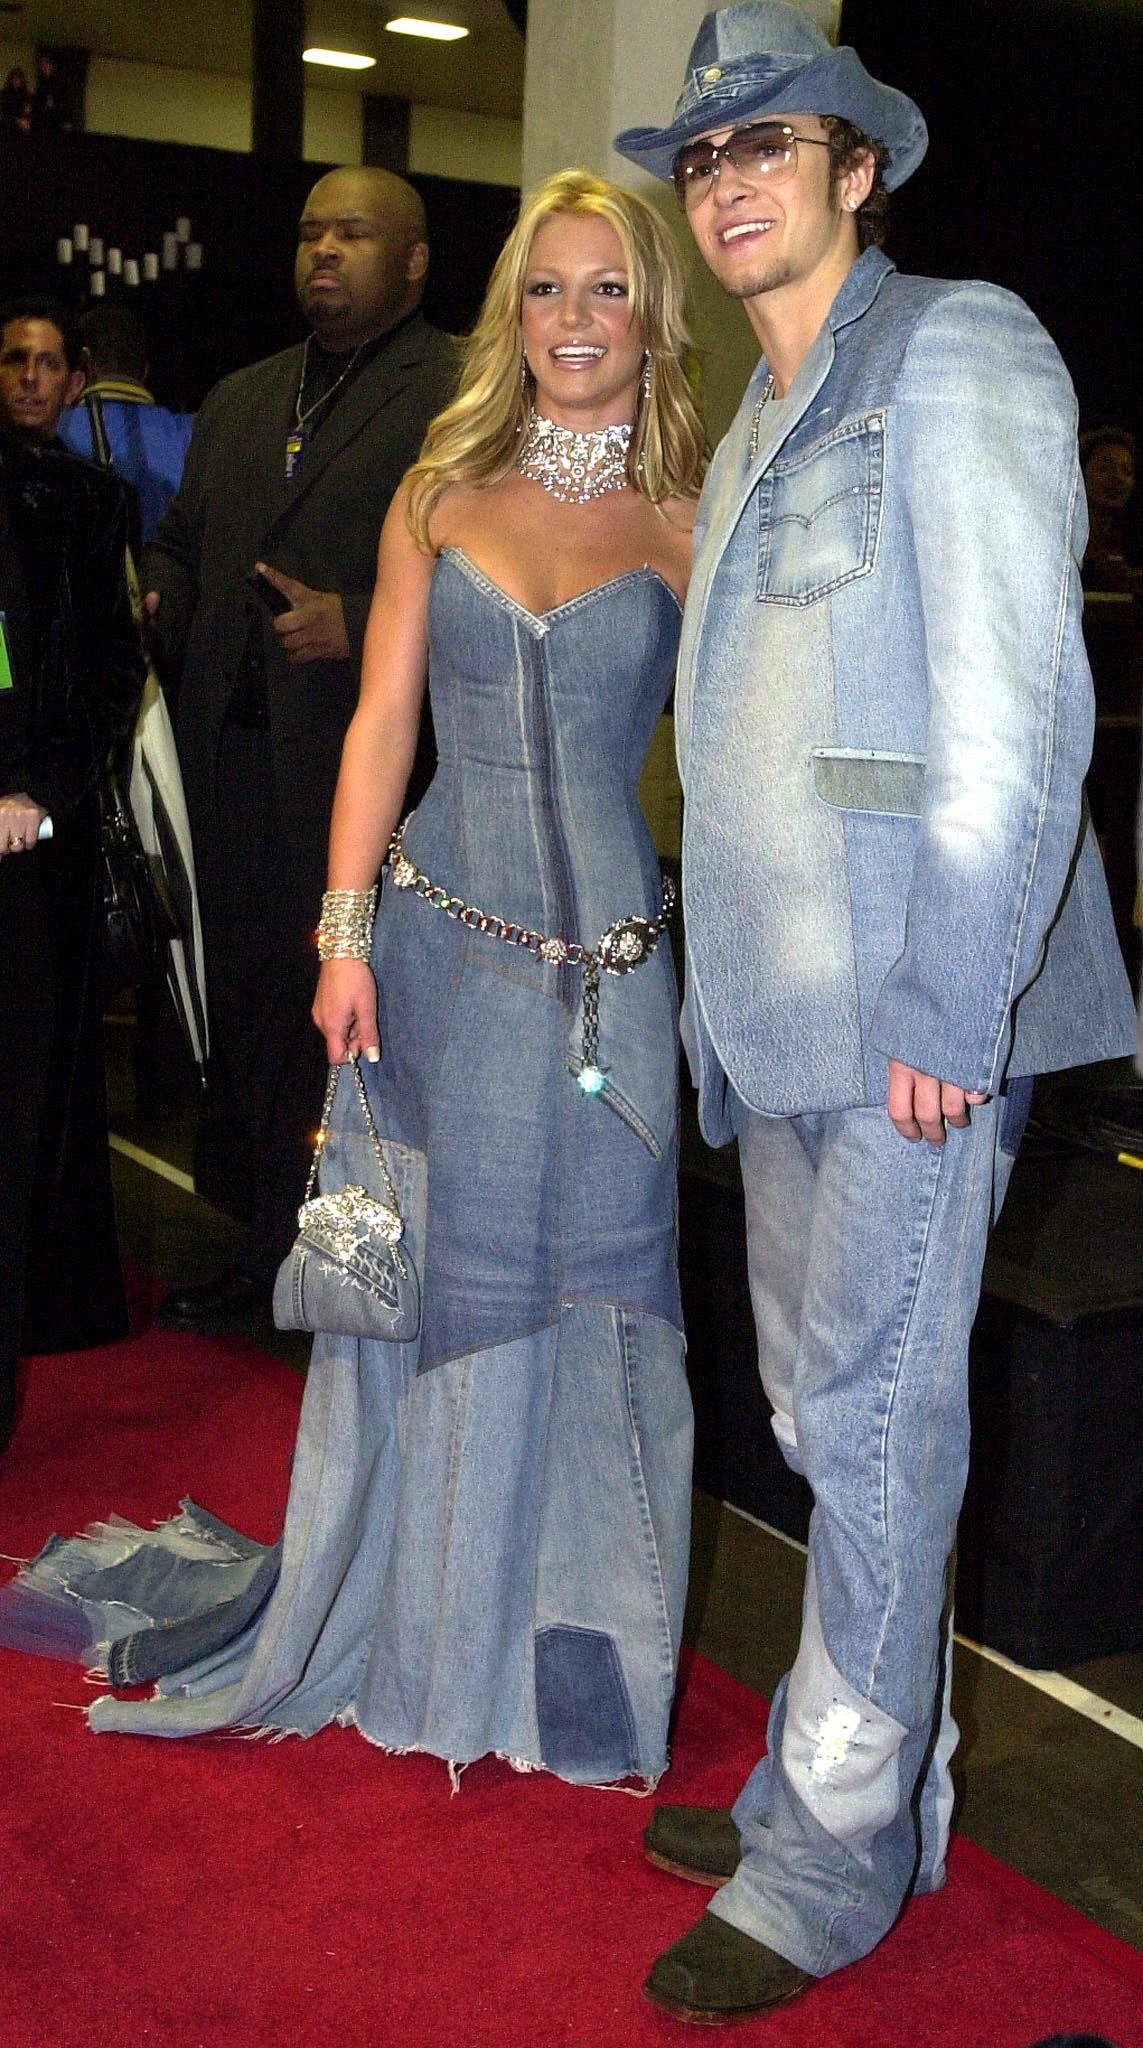 Britney Spears and Justin Timberlake on the red carpet